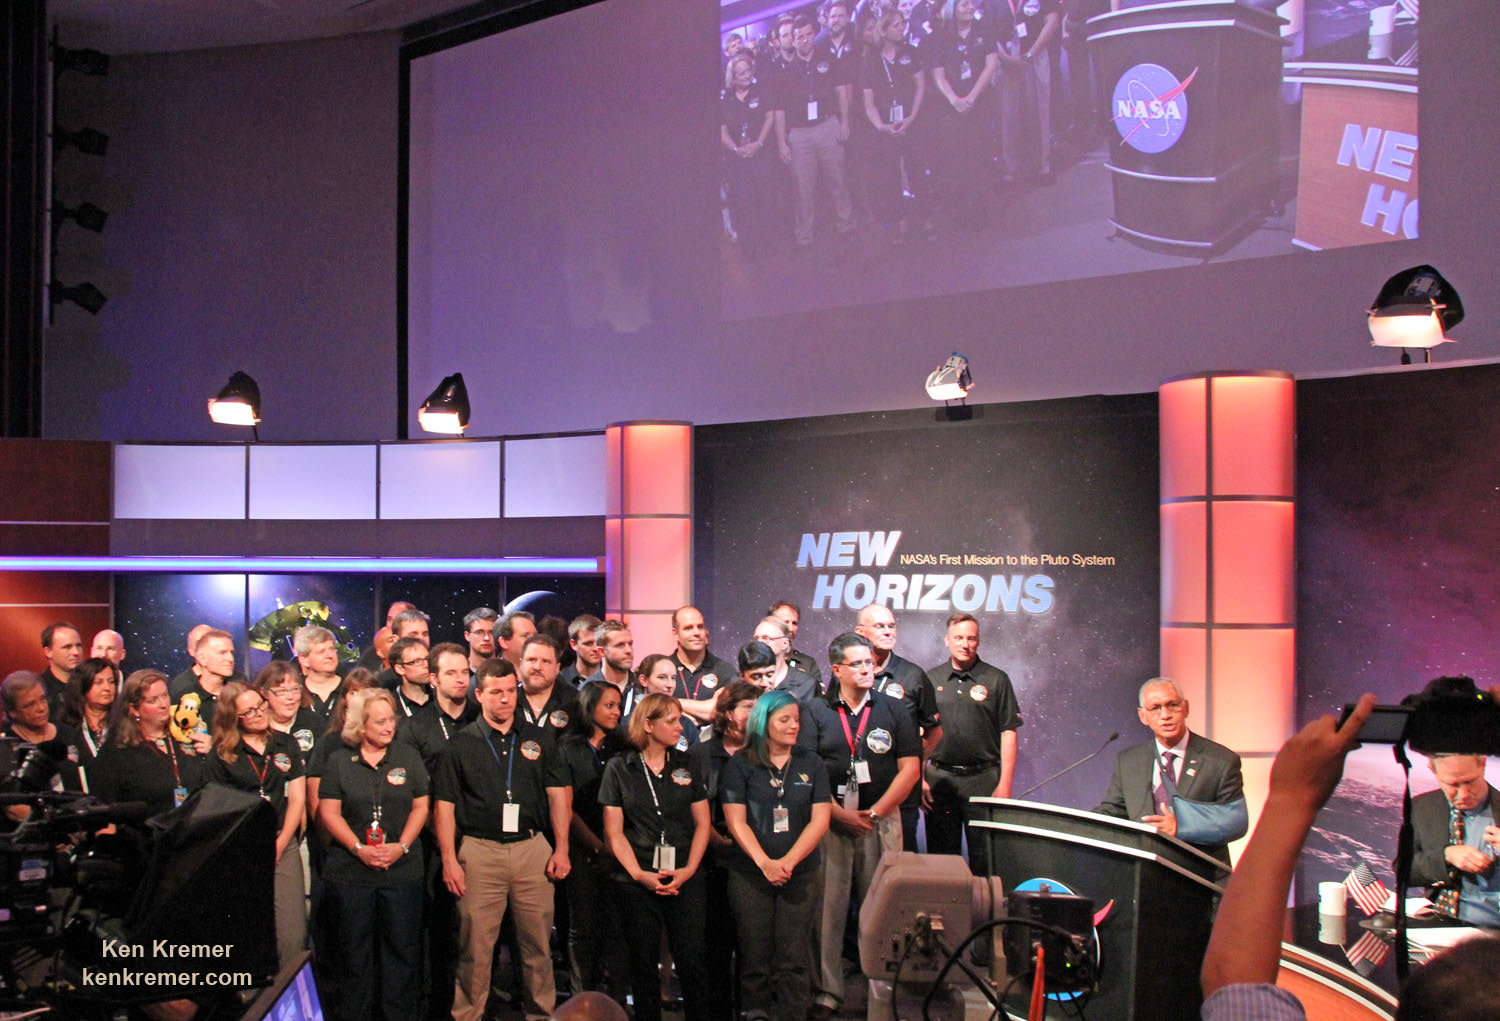 NASA Administrator Charles Bolden congratulates the New Horizons team after successful Pluto flyby on July 14, 2015 g, July 14, to cheering crowd at the Johns Hopkins University Applied Physics Laboratory (APL) in Laurel, Maryland, during  live NASA TV media briefing. Credit: Ken Kremer/kenkremer.com